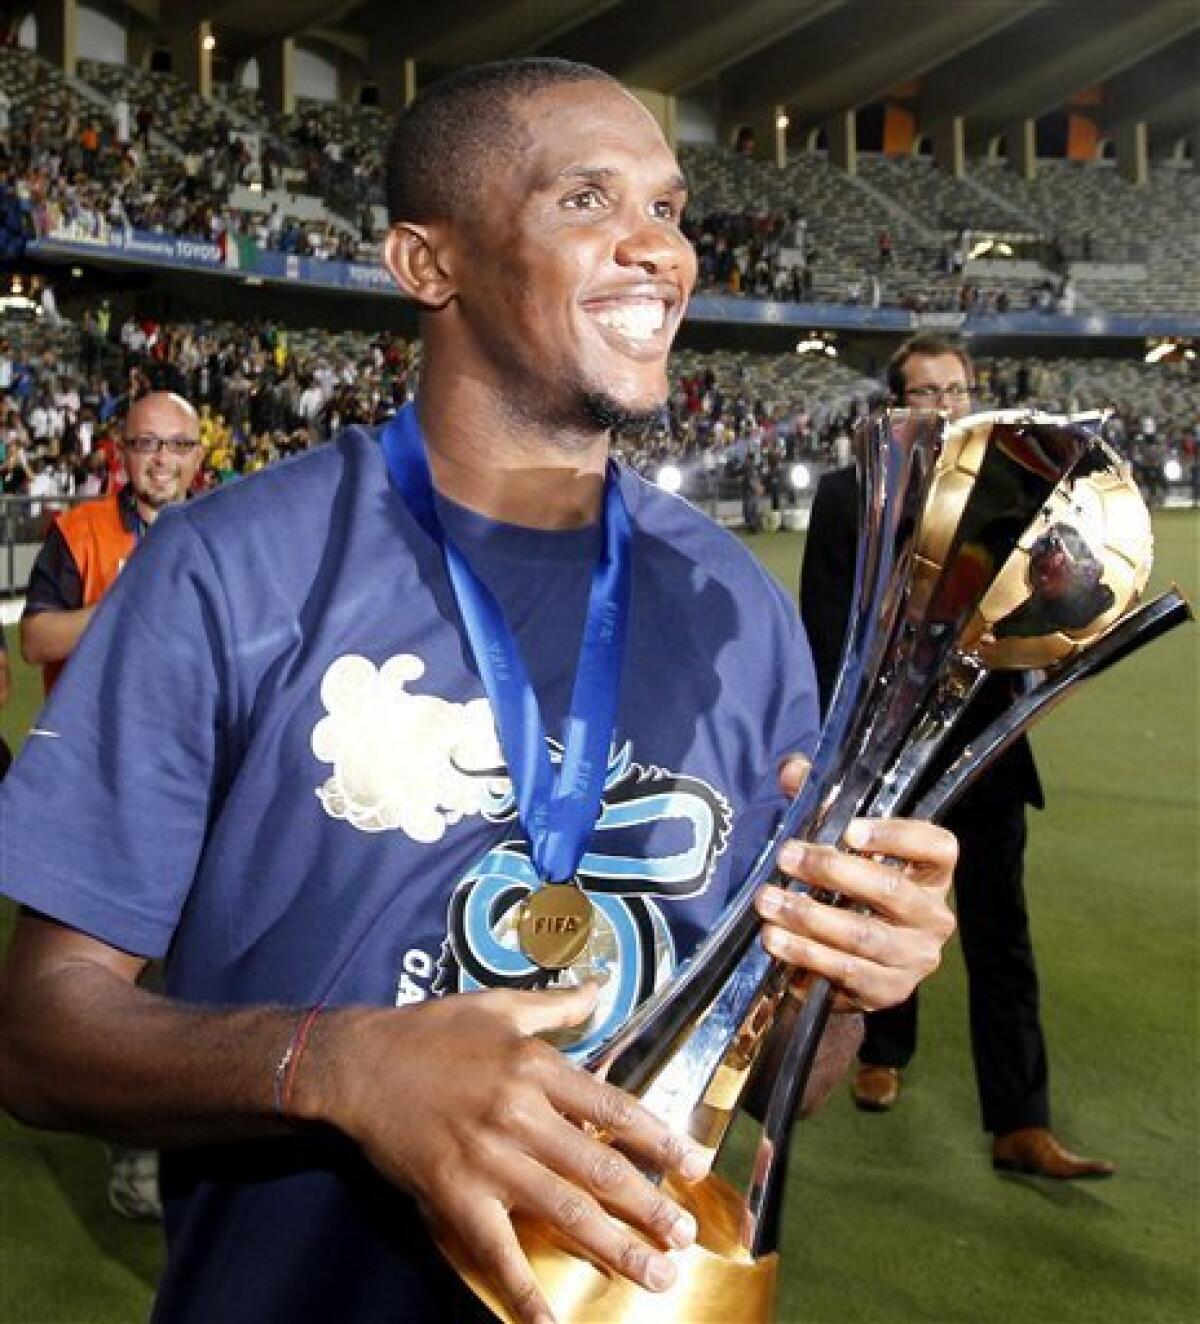 Inter Milan's Samuel Eto'o holds the trophy after winning the Club World Cup final soccer match against TP Mazembe at Zayed sport city in Abu Dhabi, United Arab Emirates, Saturday, Dec. 18, 2010. (AP Photo/Hassan Ammar)